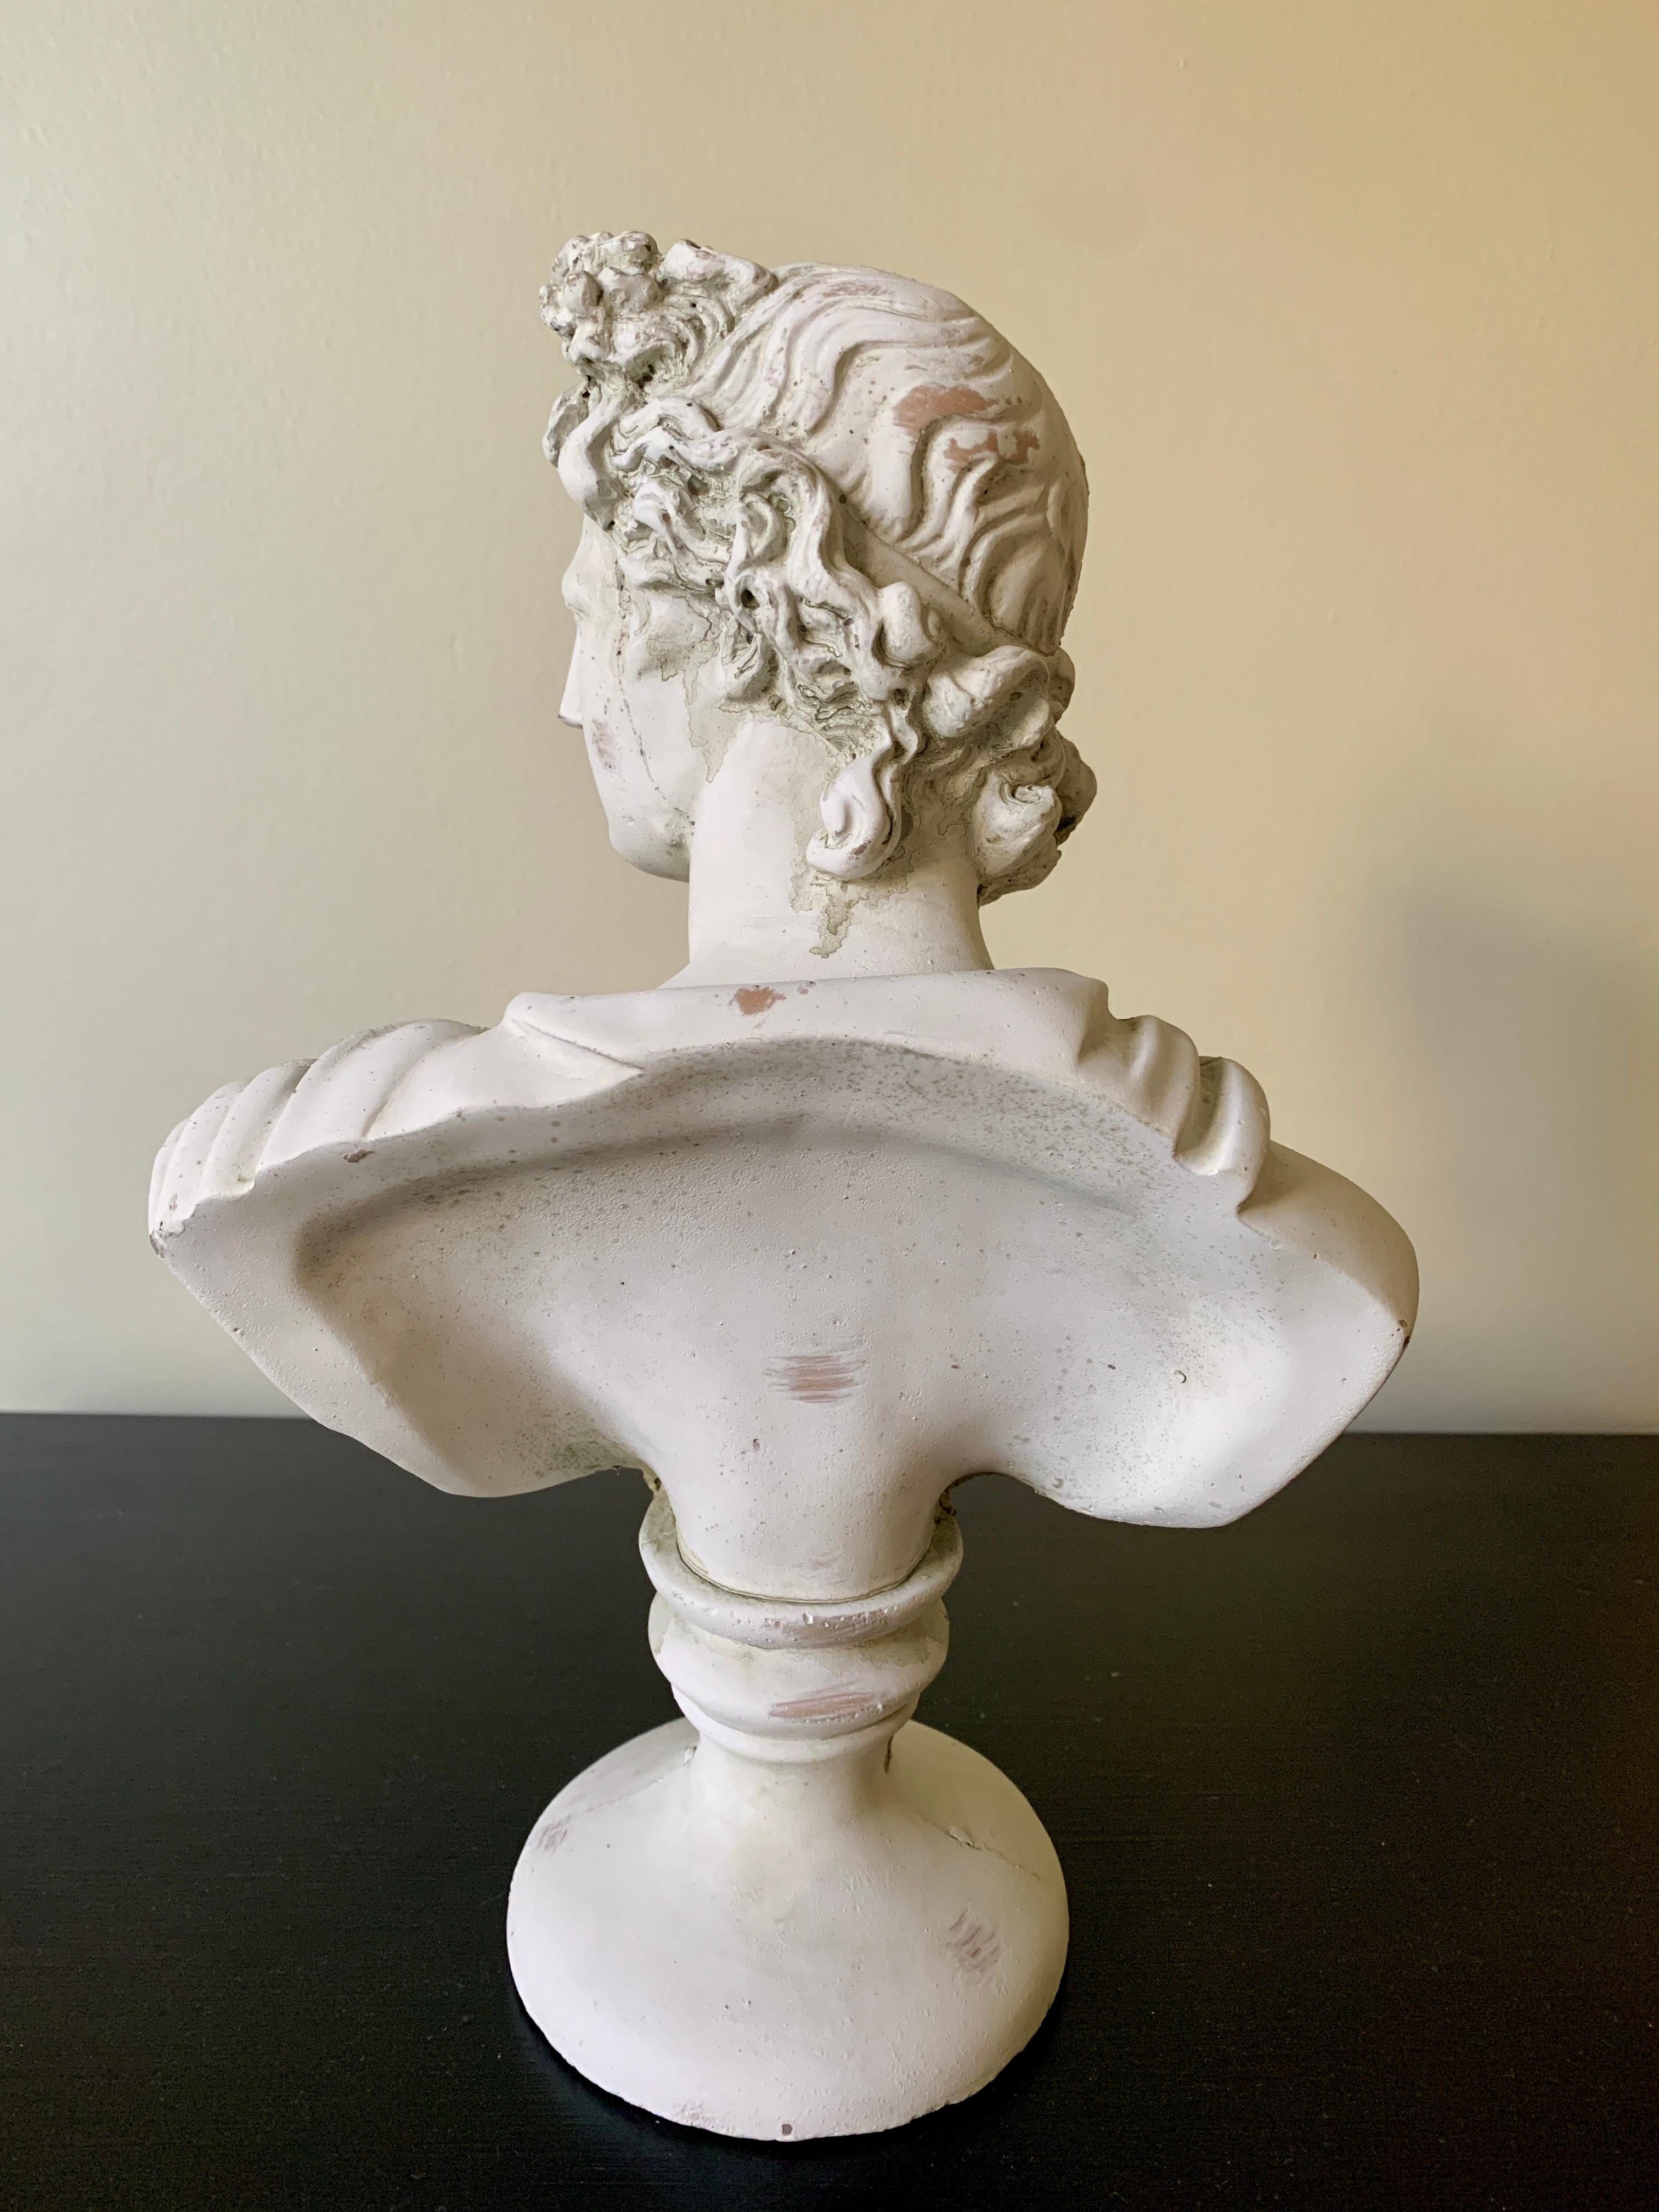 Contemporary Classical Plaster Bust of Mythological Apollo Belvedere Sculpture For Sale